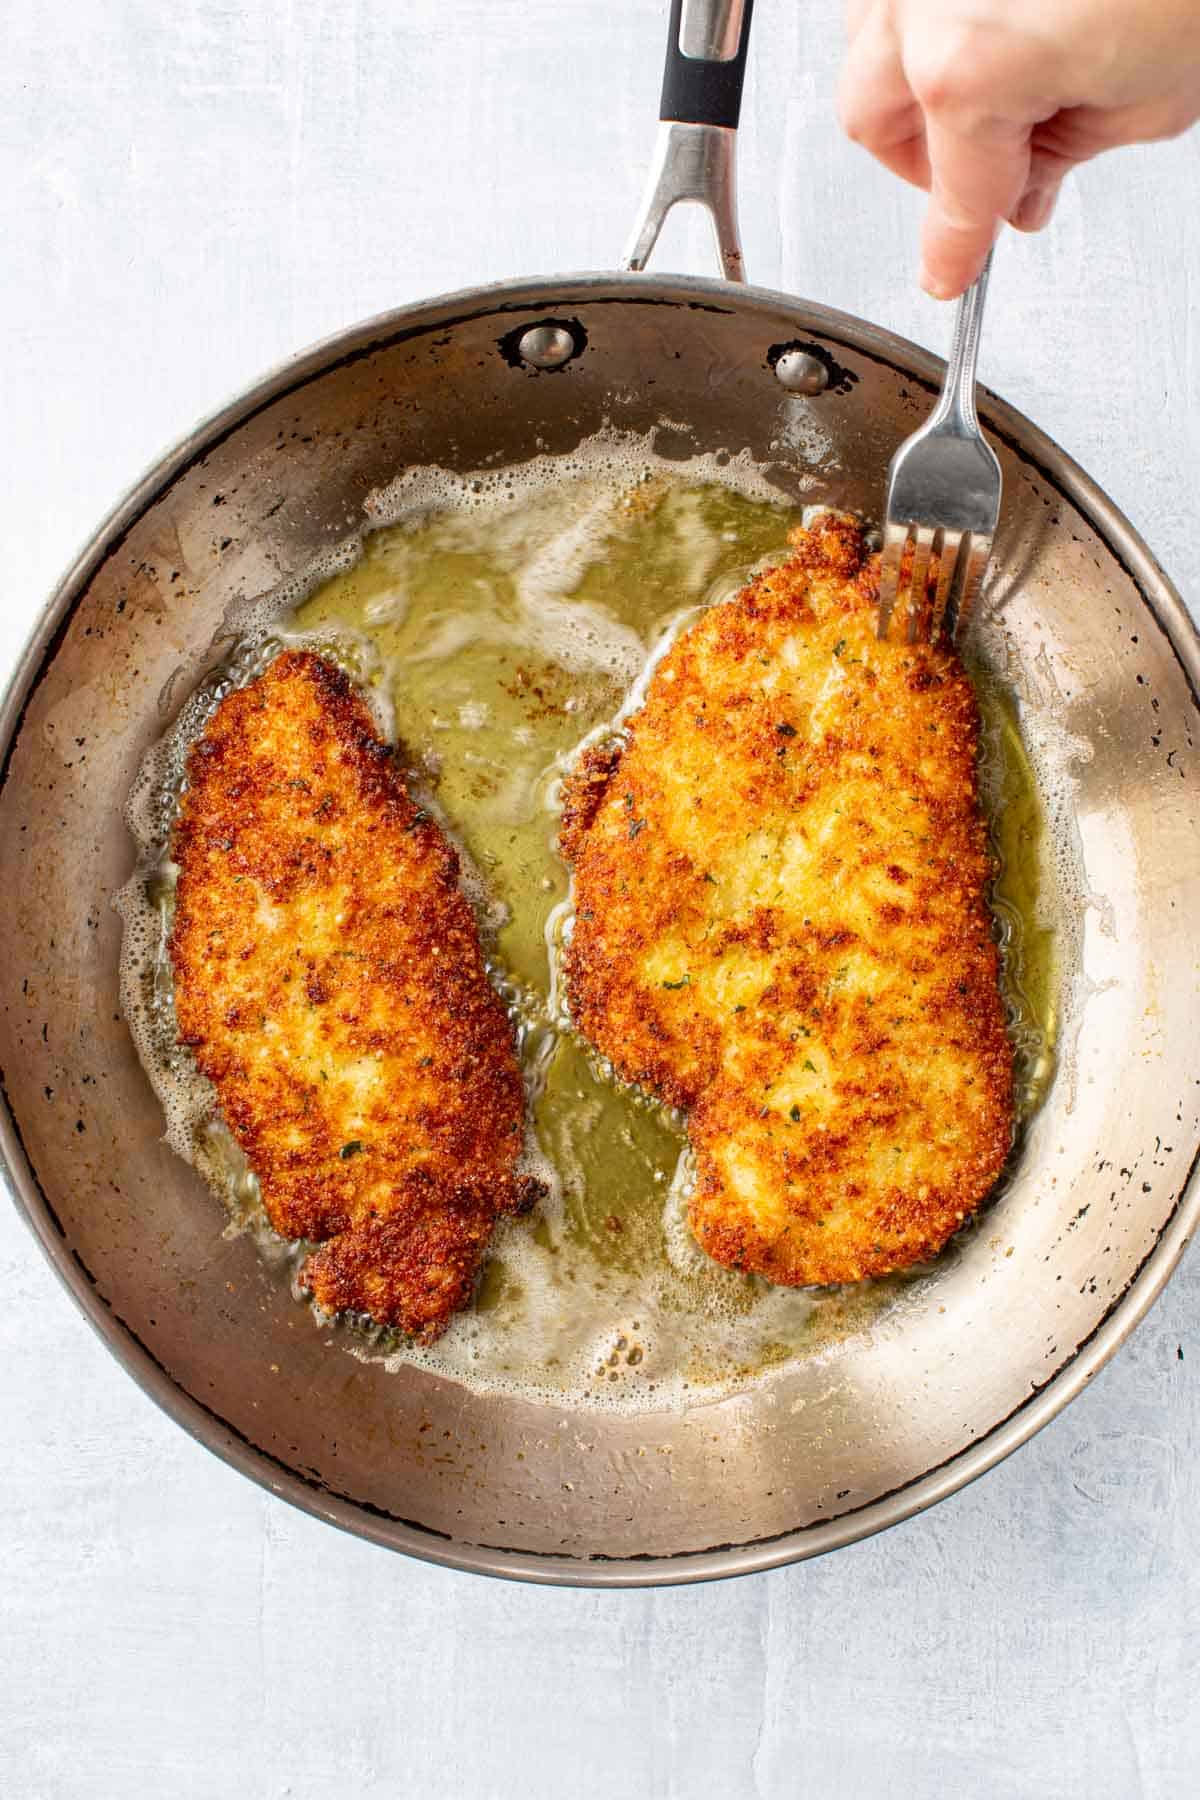 Pan frying two chicken cutlets in a pan with olive oil.